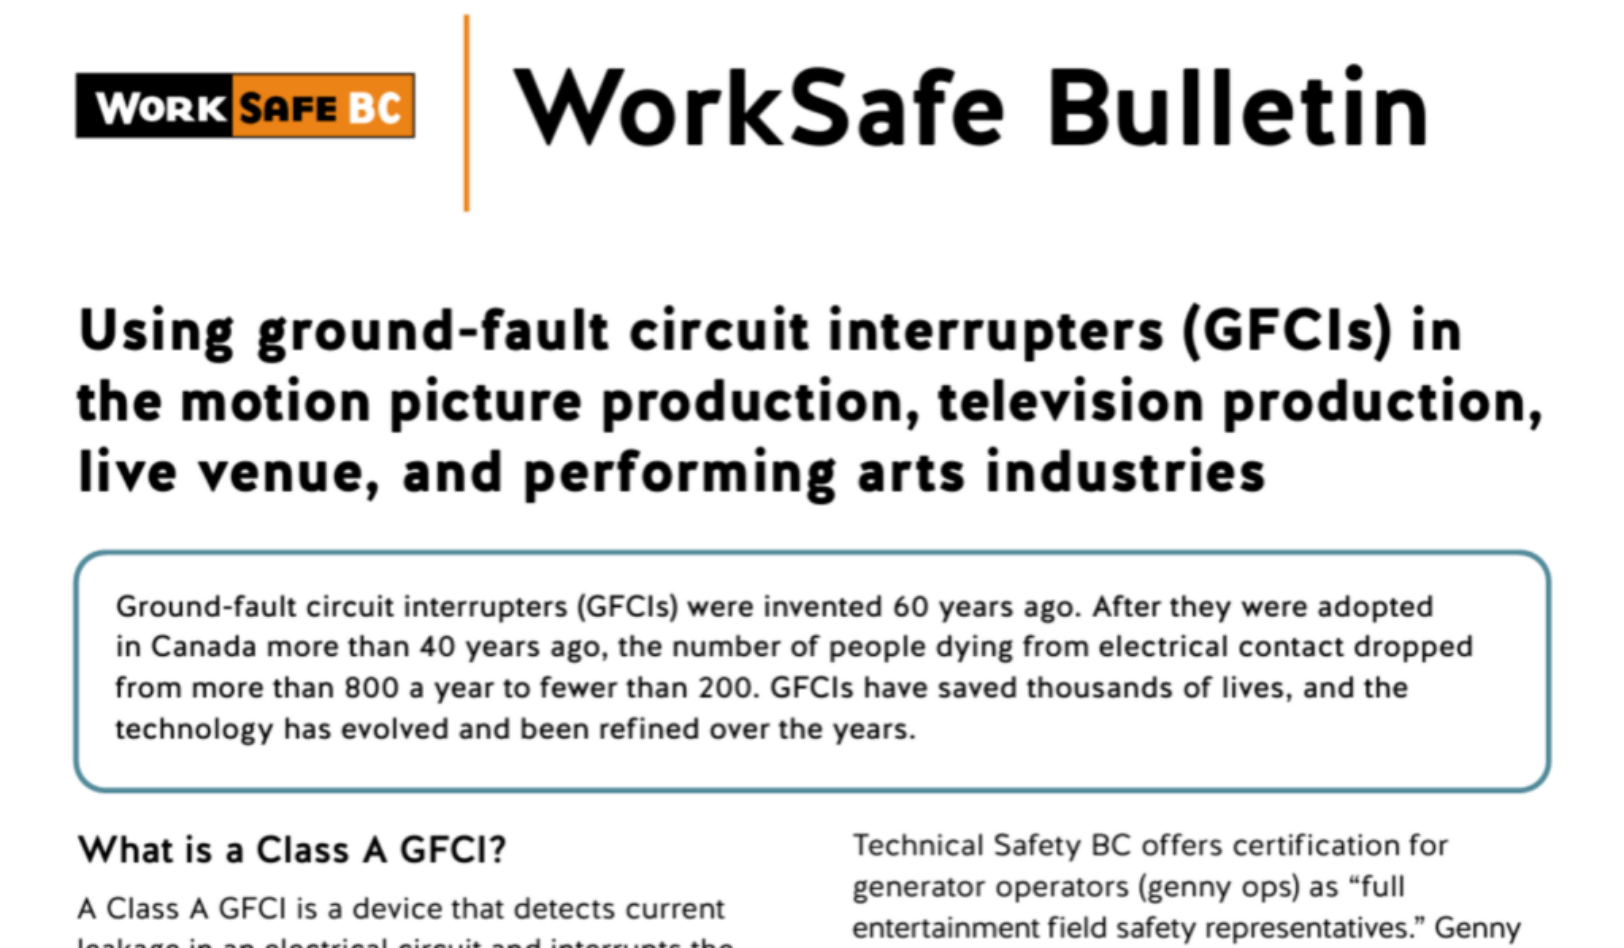 Using ground-fault circuit interrupters (GFCIs)